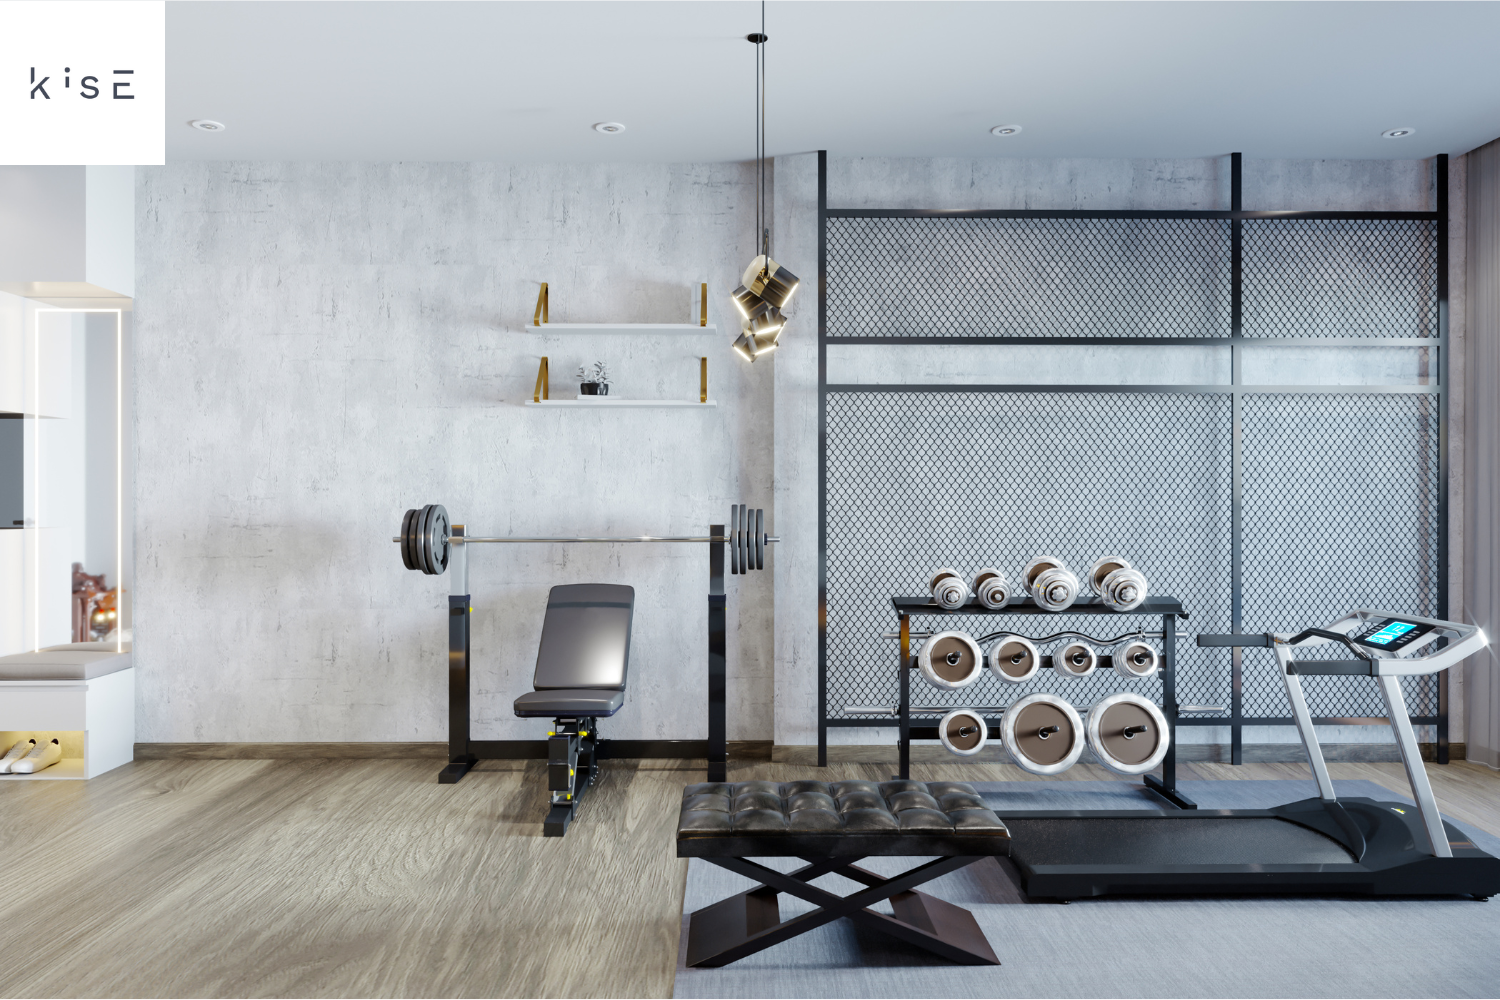 Home Gym Storage Ideas For Small Spaces - keep it simpElle